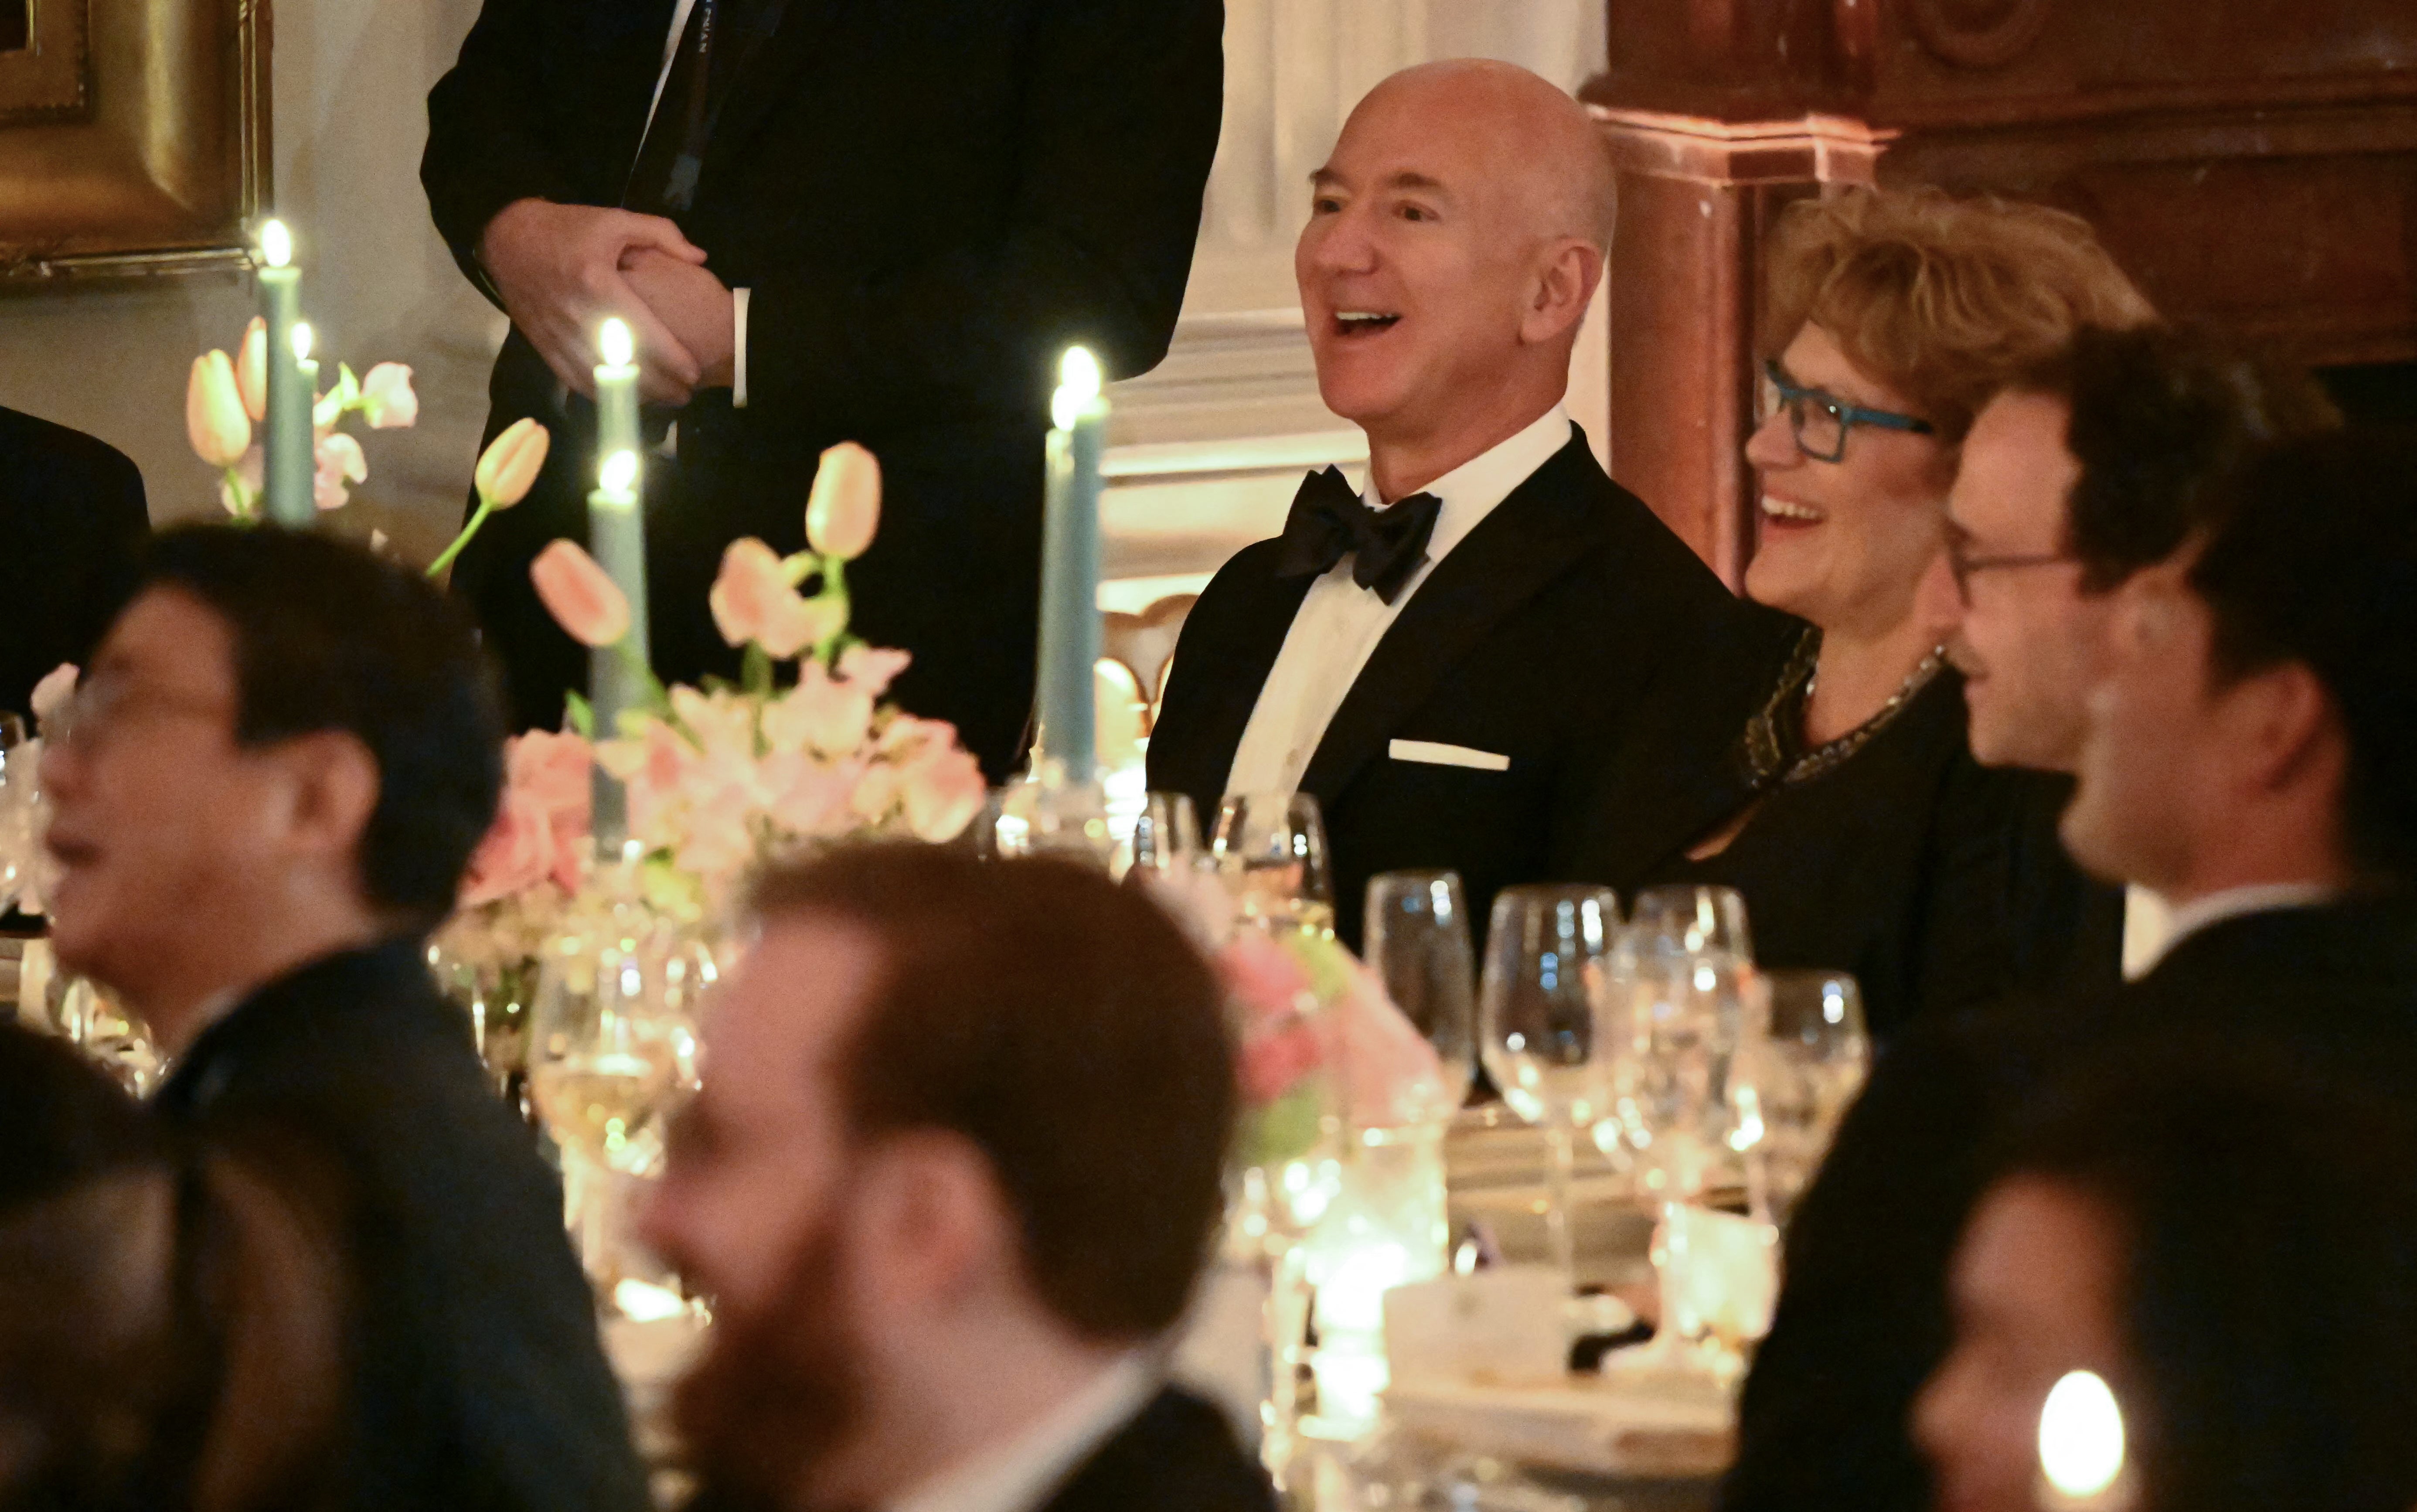 Big Tech moguls Tim Cook and Jeff Bezos (pictured), who was joined by Lauren Sanchez, were also in attendance